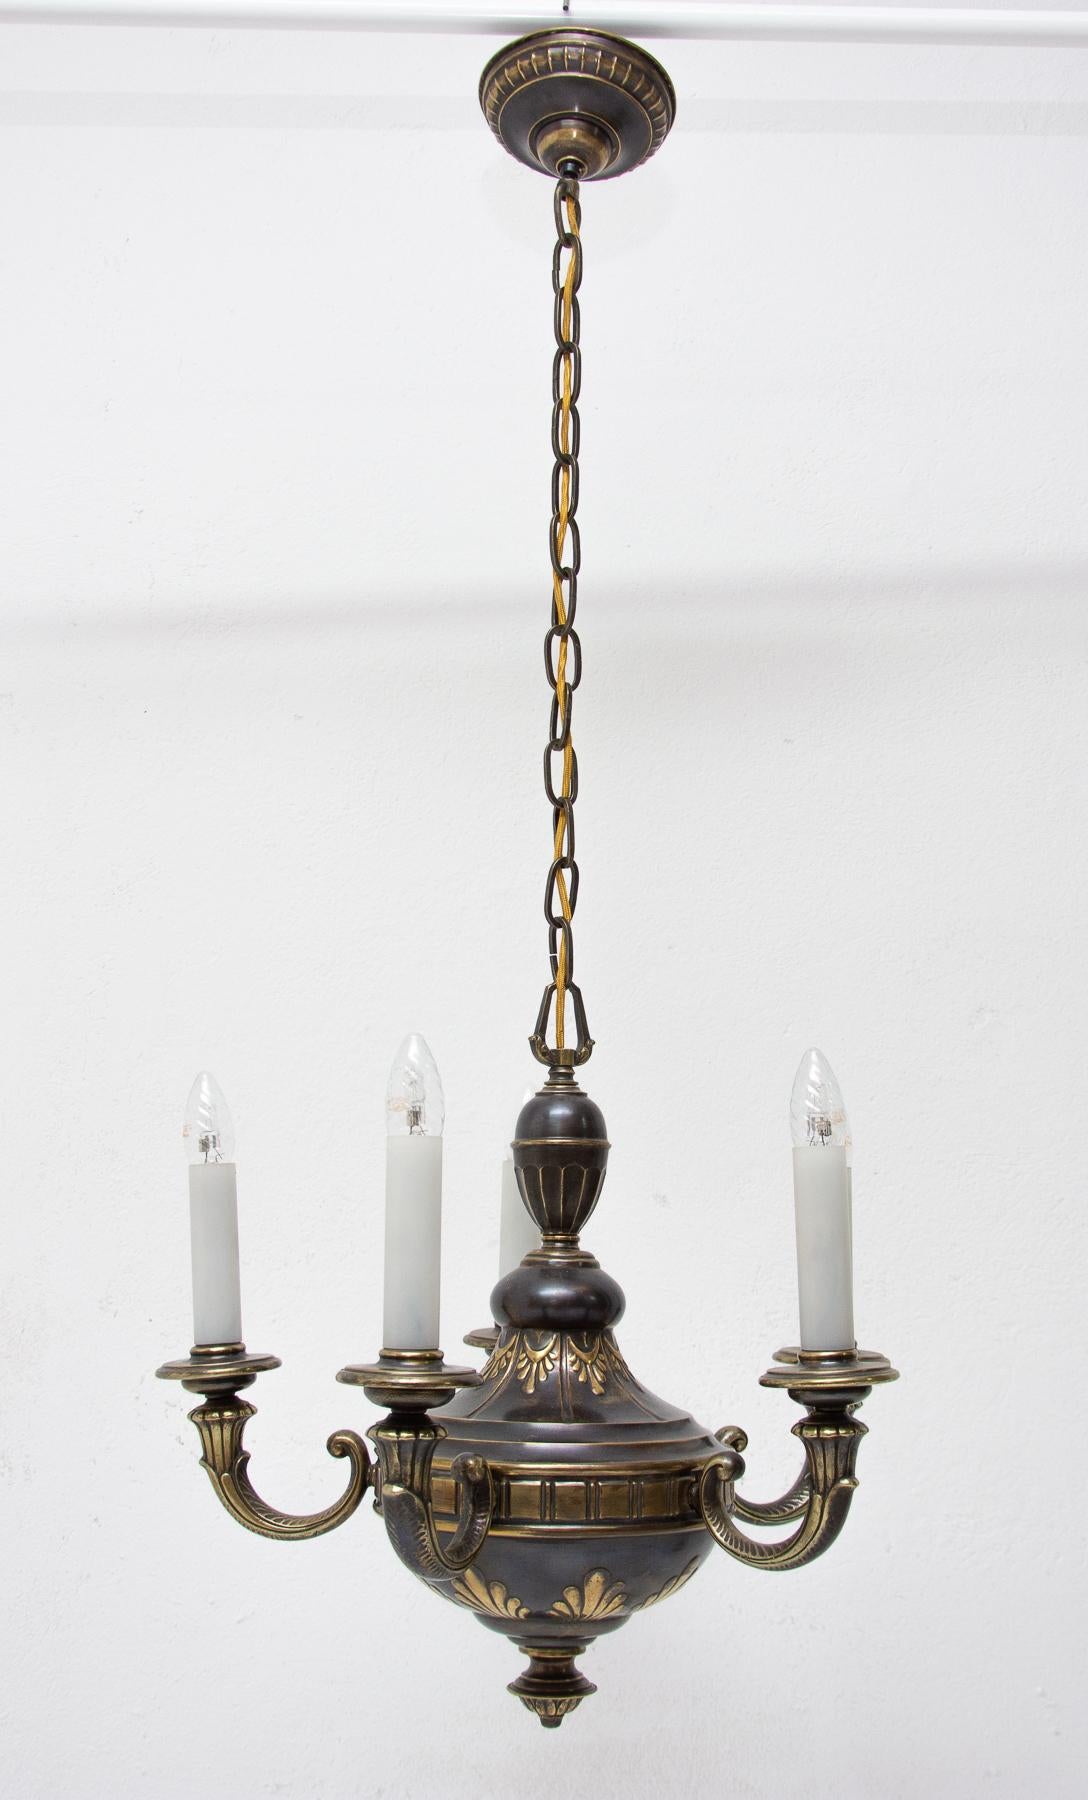 A beautiful brass five-armed chandelier in a historicizing style from the turn of the 19th and 20th centuries. It was made in the territory of the former Austro-Hungarian Empire. The chandelier is in excellent condition with a nice patina. It was